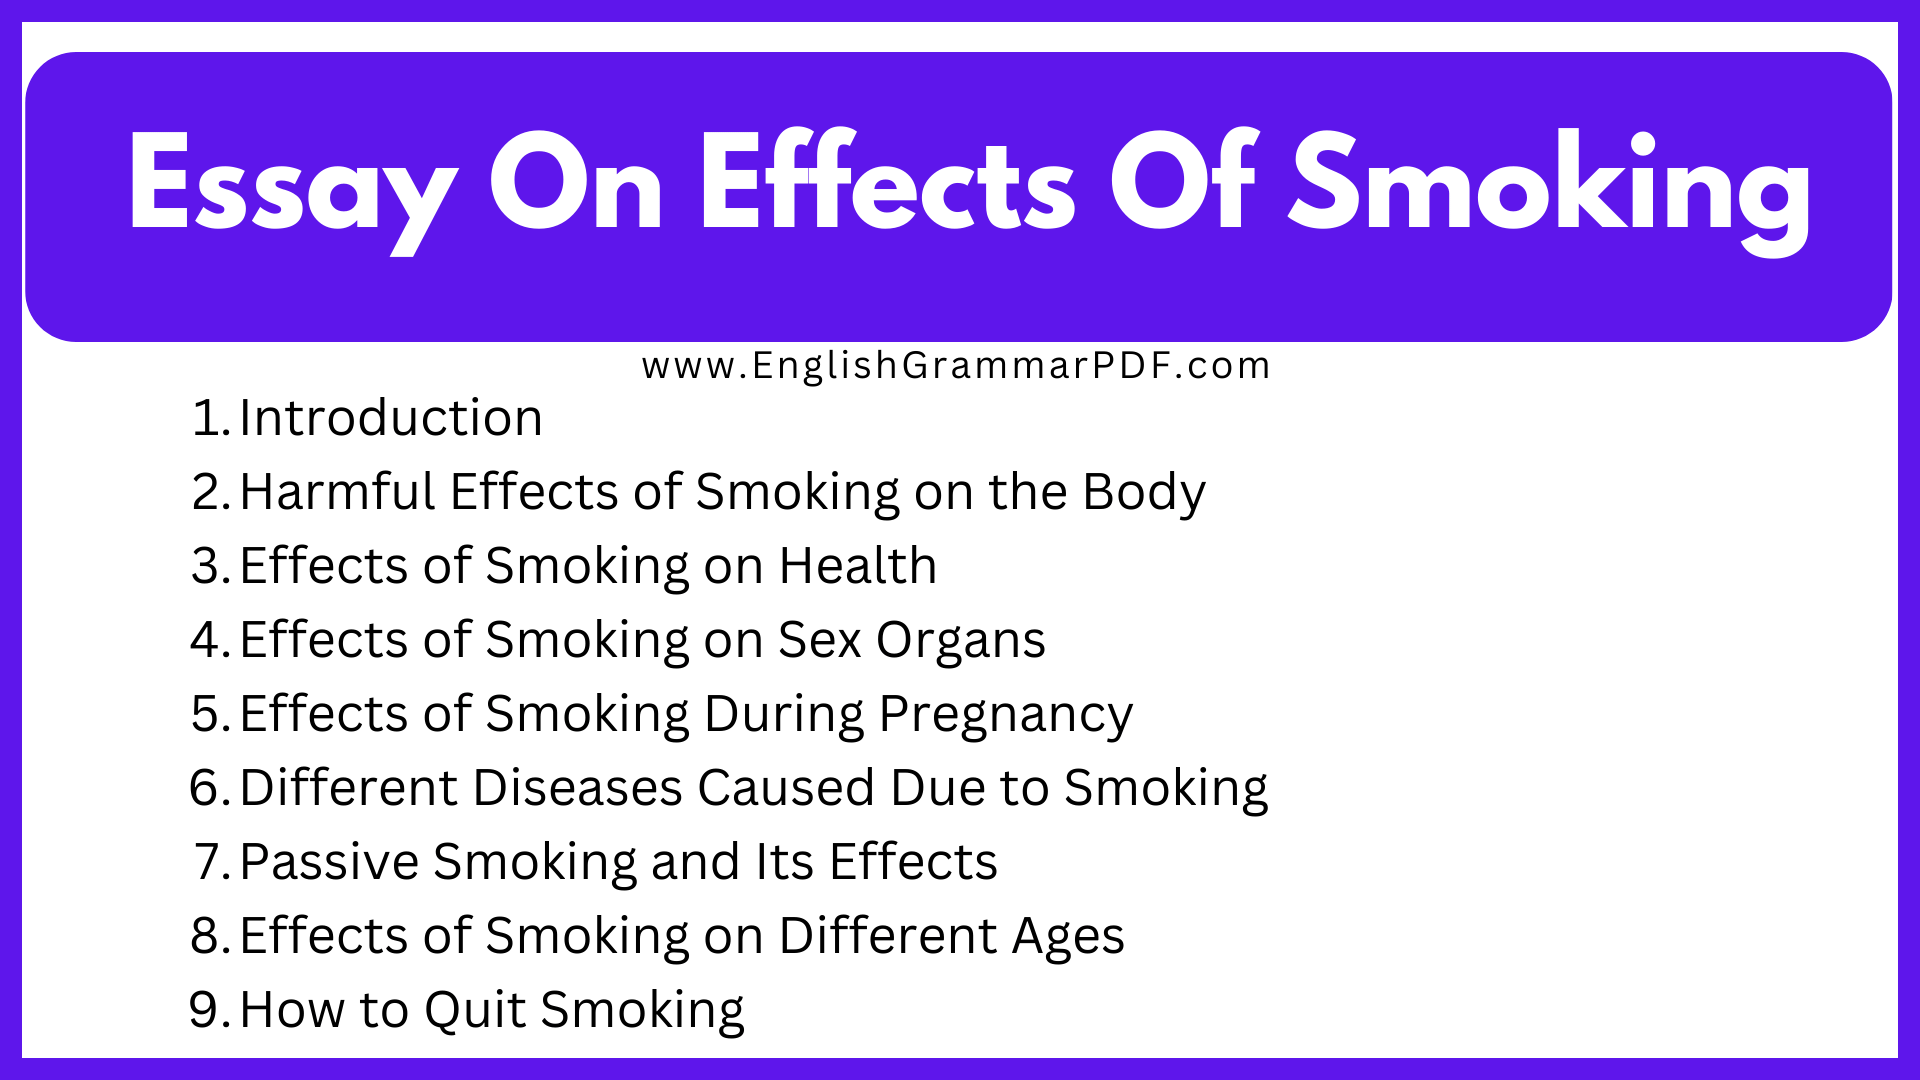 Essay On Effects Of Smoking